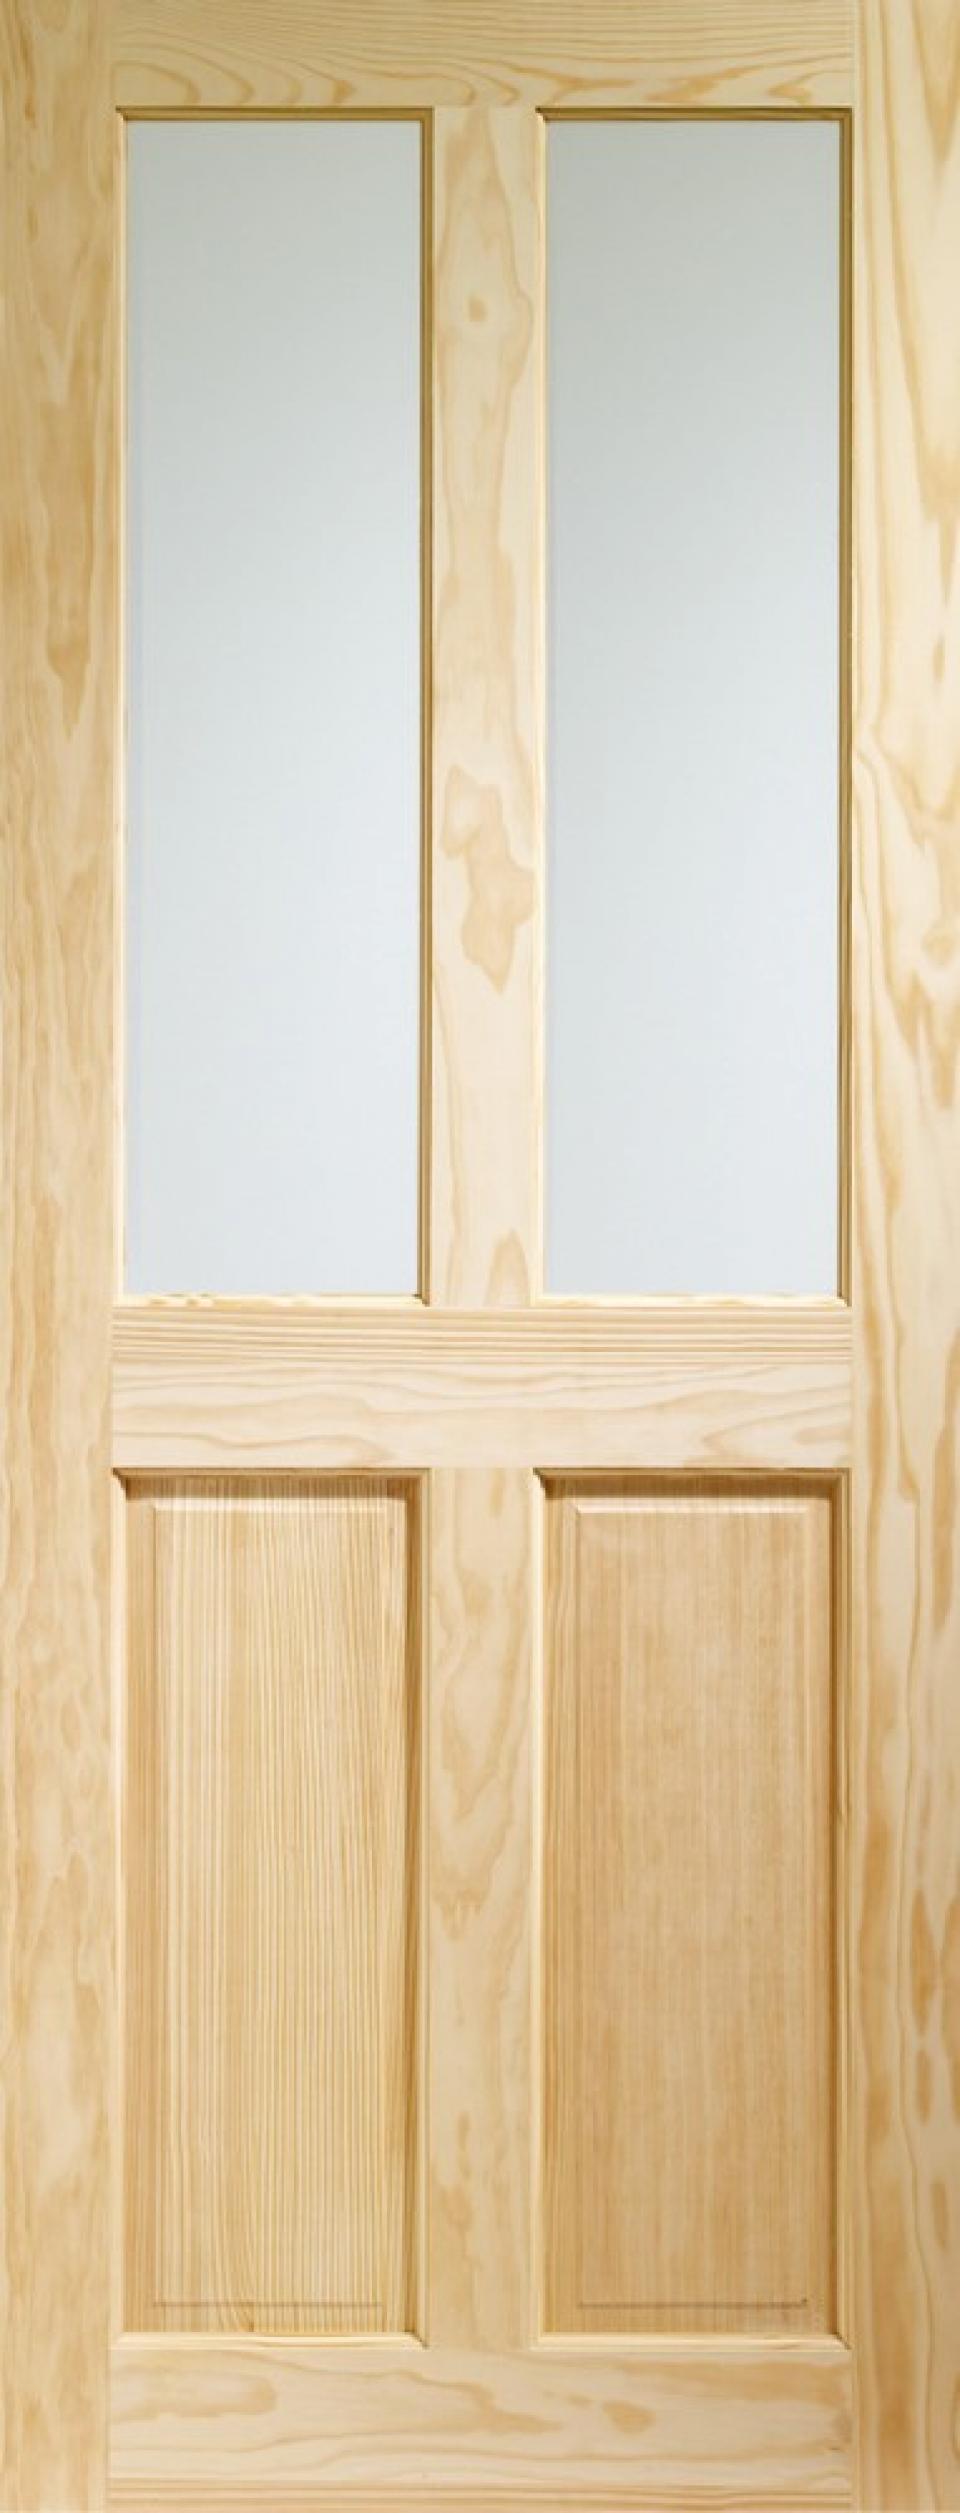 Clear Pine Vict Clear Glass 1981 x 686 x 35mm (27)